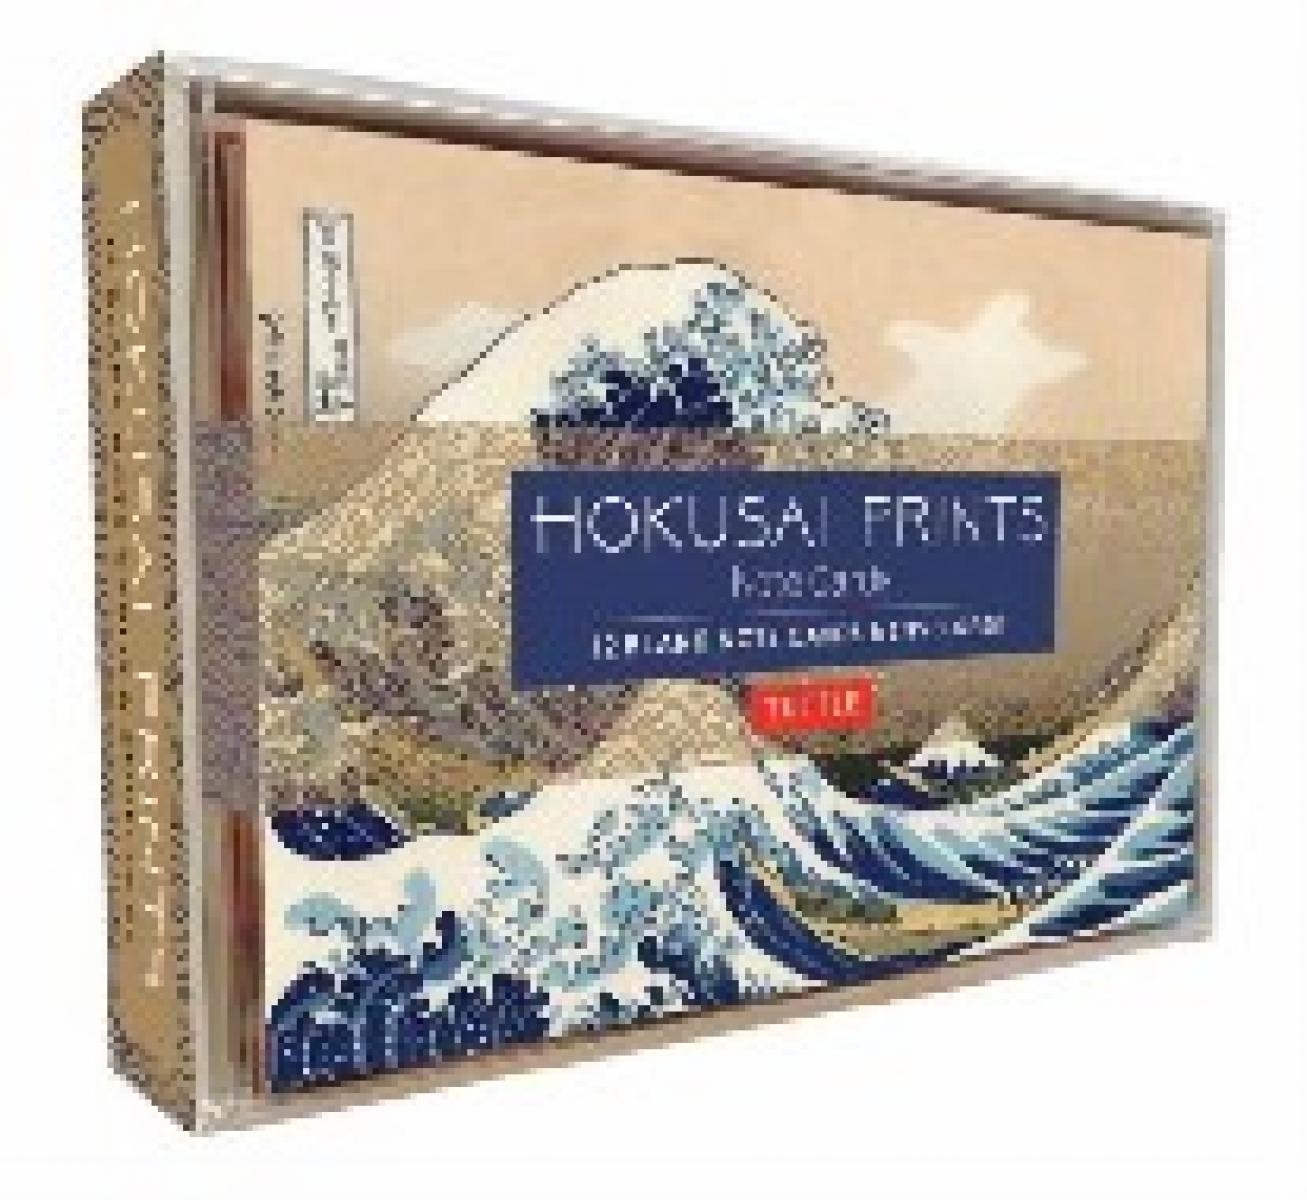 Hokusai Prints Note Cards: 12 Blank Note Cards & Envelopes 